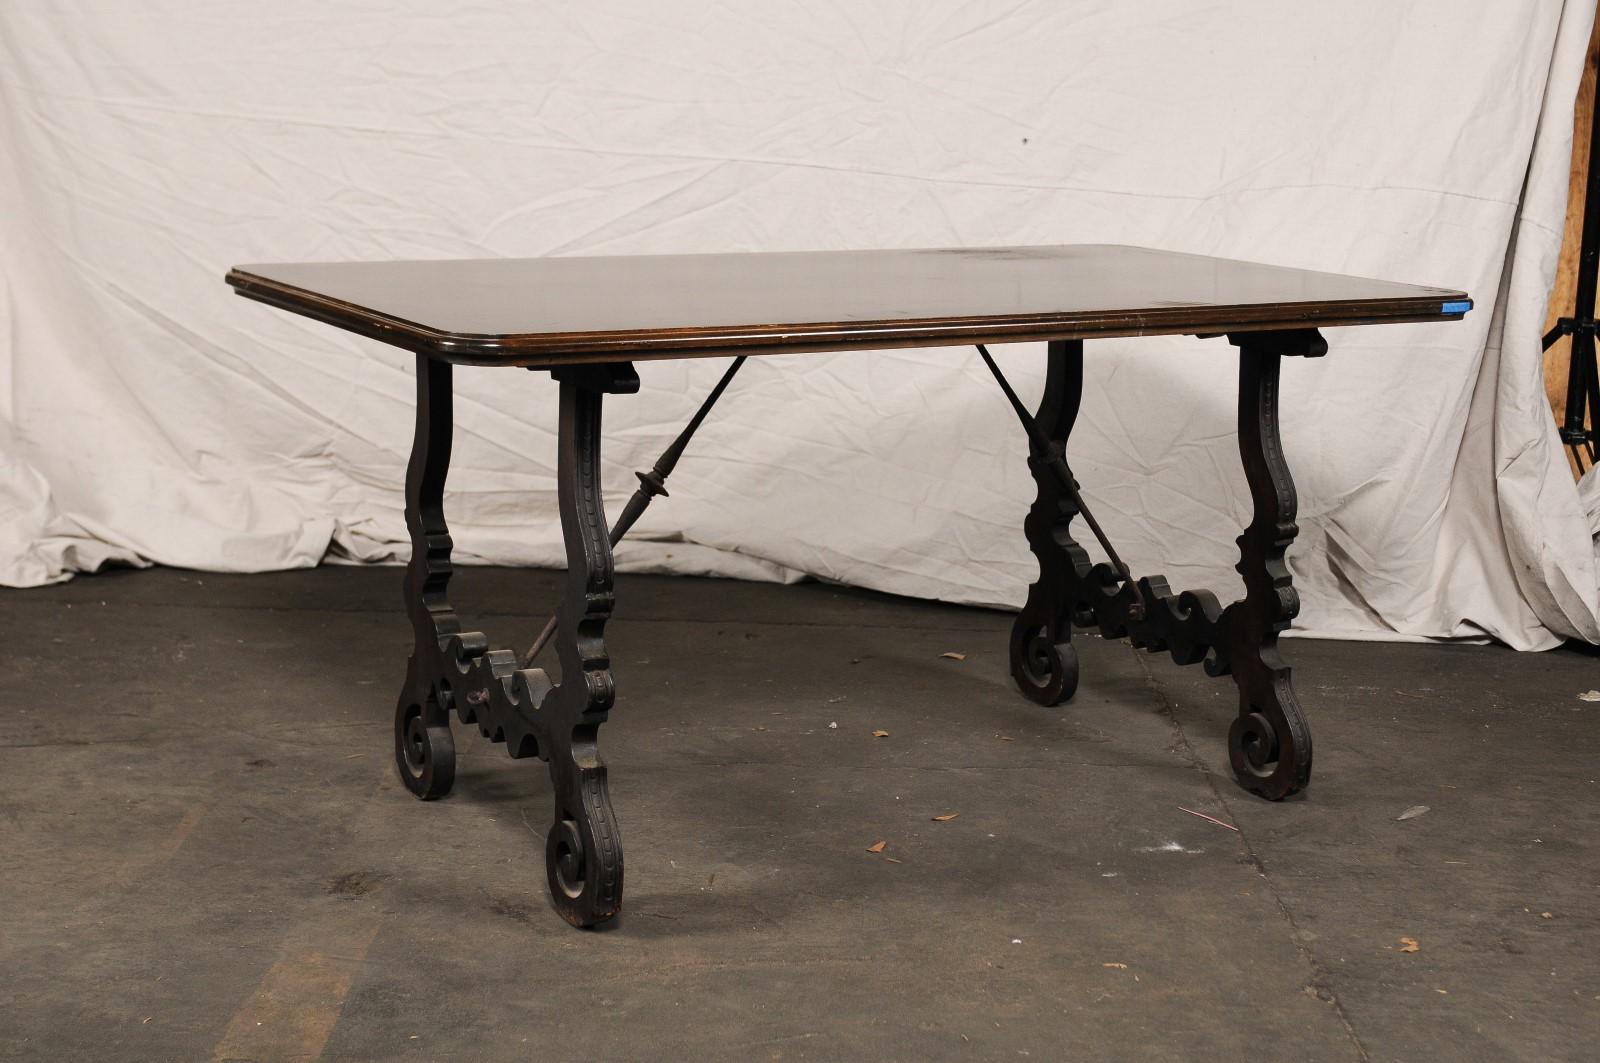 18th-19th century Spanish trestle table with iron stretcher, later parts.